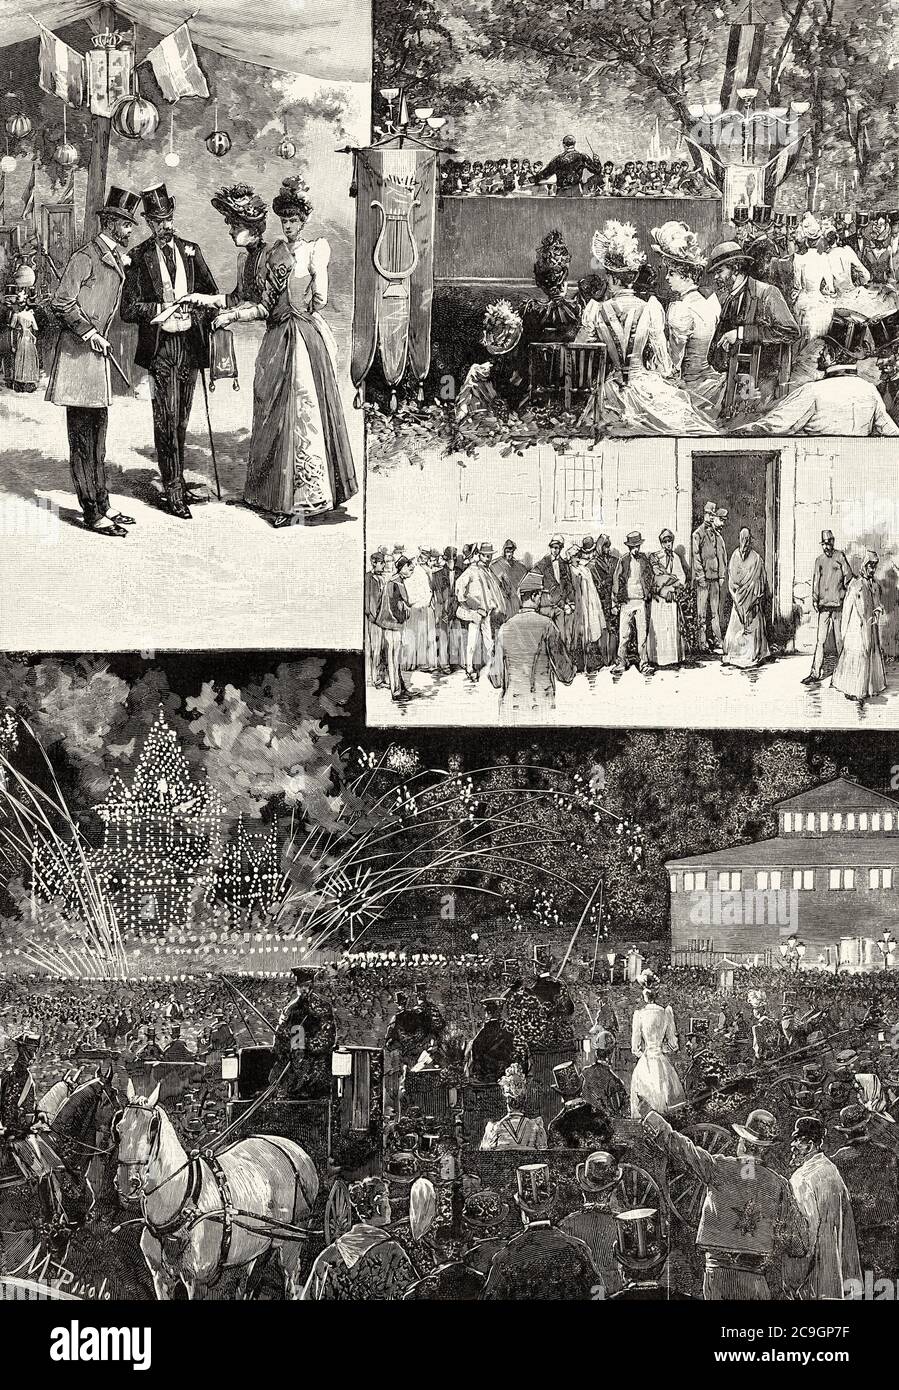 Celebrations of May 1890 in Madrid, concerts in the Retiro Park, distribution of bread vouchers to the poor, fireworks in the Plaza de Santa Barbara, Party and fun in the late 19th century, Spain. Old XIX century engraved illustration from La Ilustracion Española y Americana 1890 Stock Photo